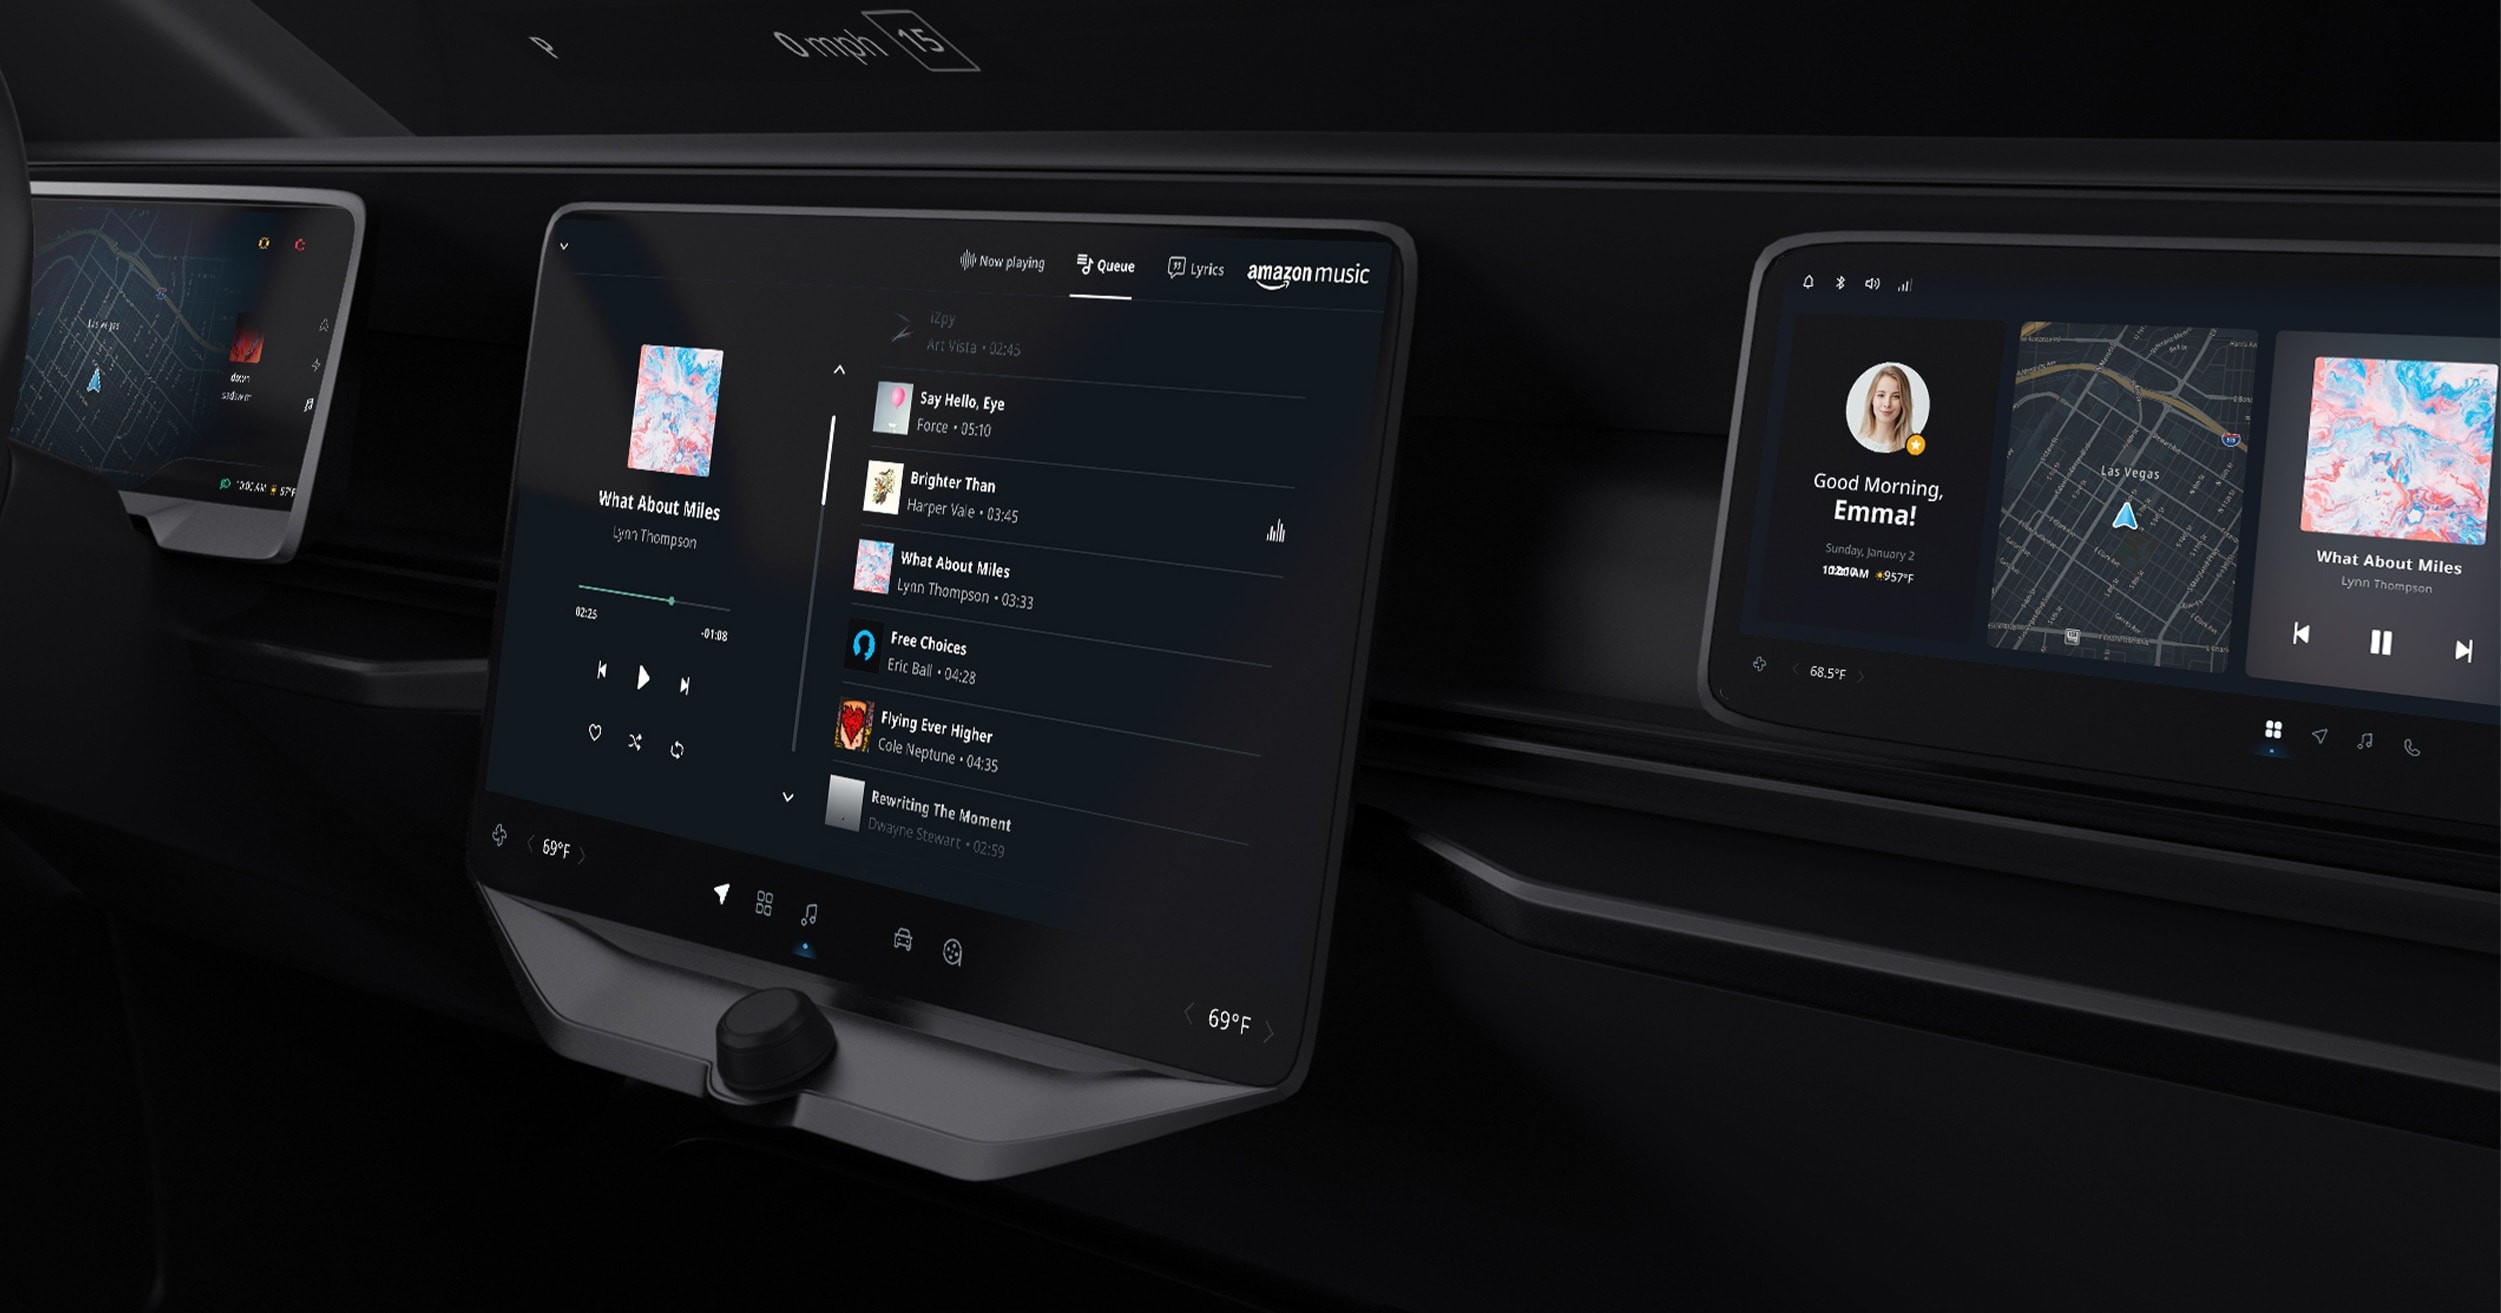 TomTom Digital Cockpit now comes with Amazon Music out of the box | TomTom Blog